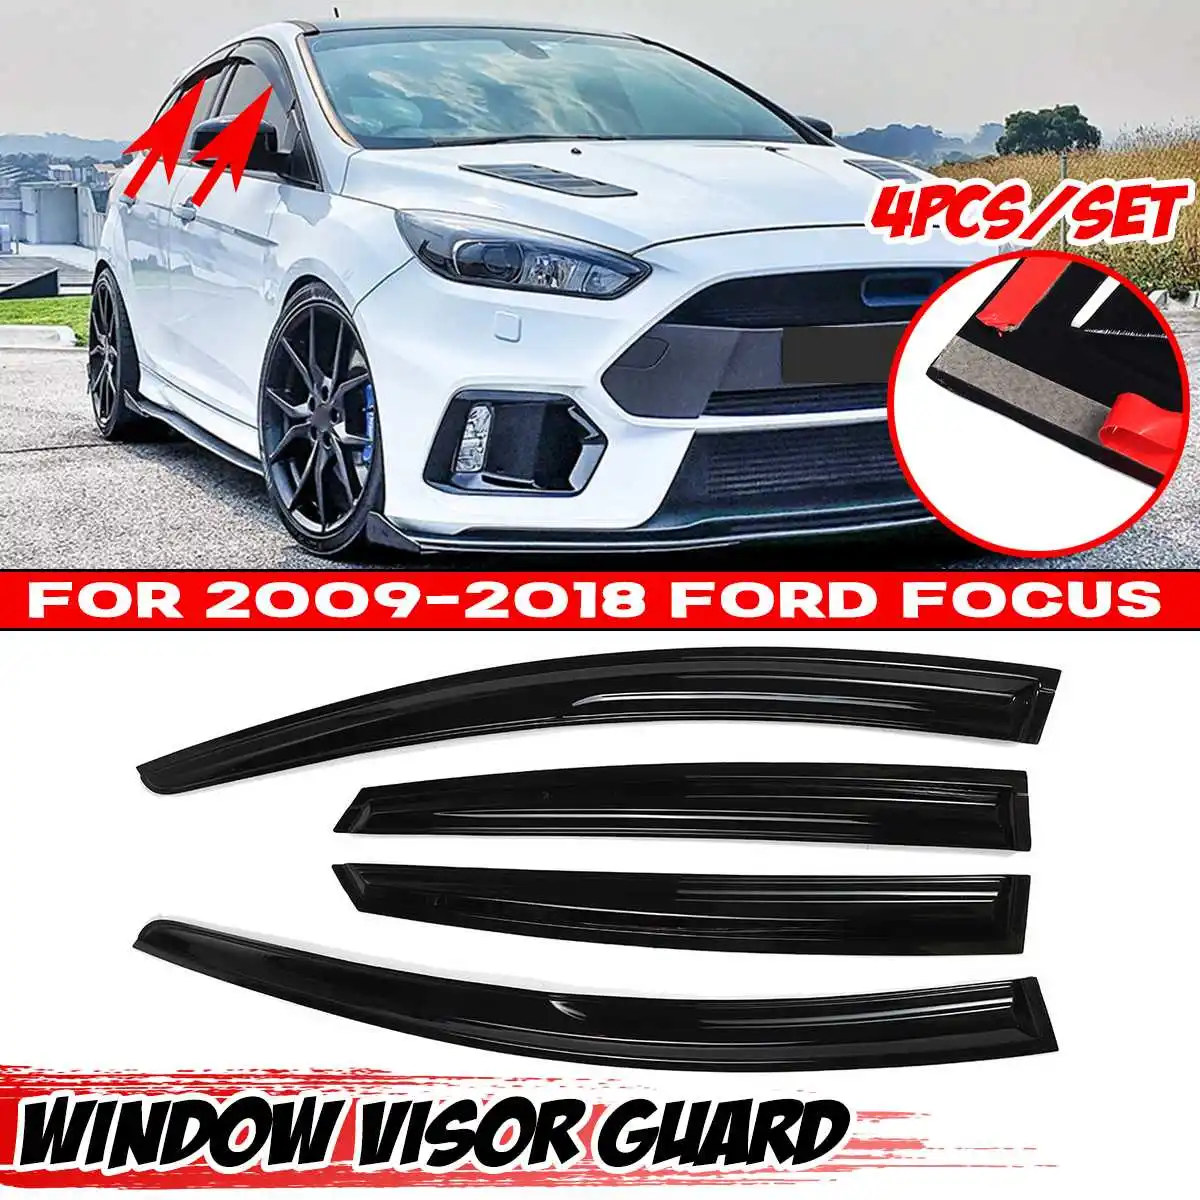 

4 Pcs Black Tinted Car Side Window Visor Guard Vent Rain Guard Cover Trim Protection Awning Shelter For FORD For FOCUS 2009-2018